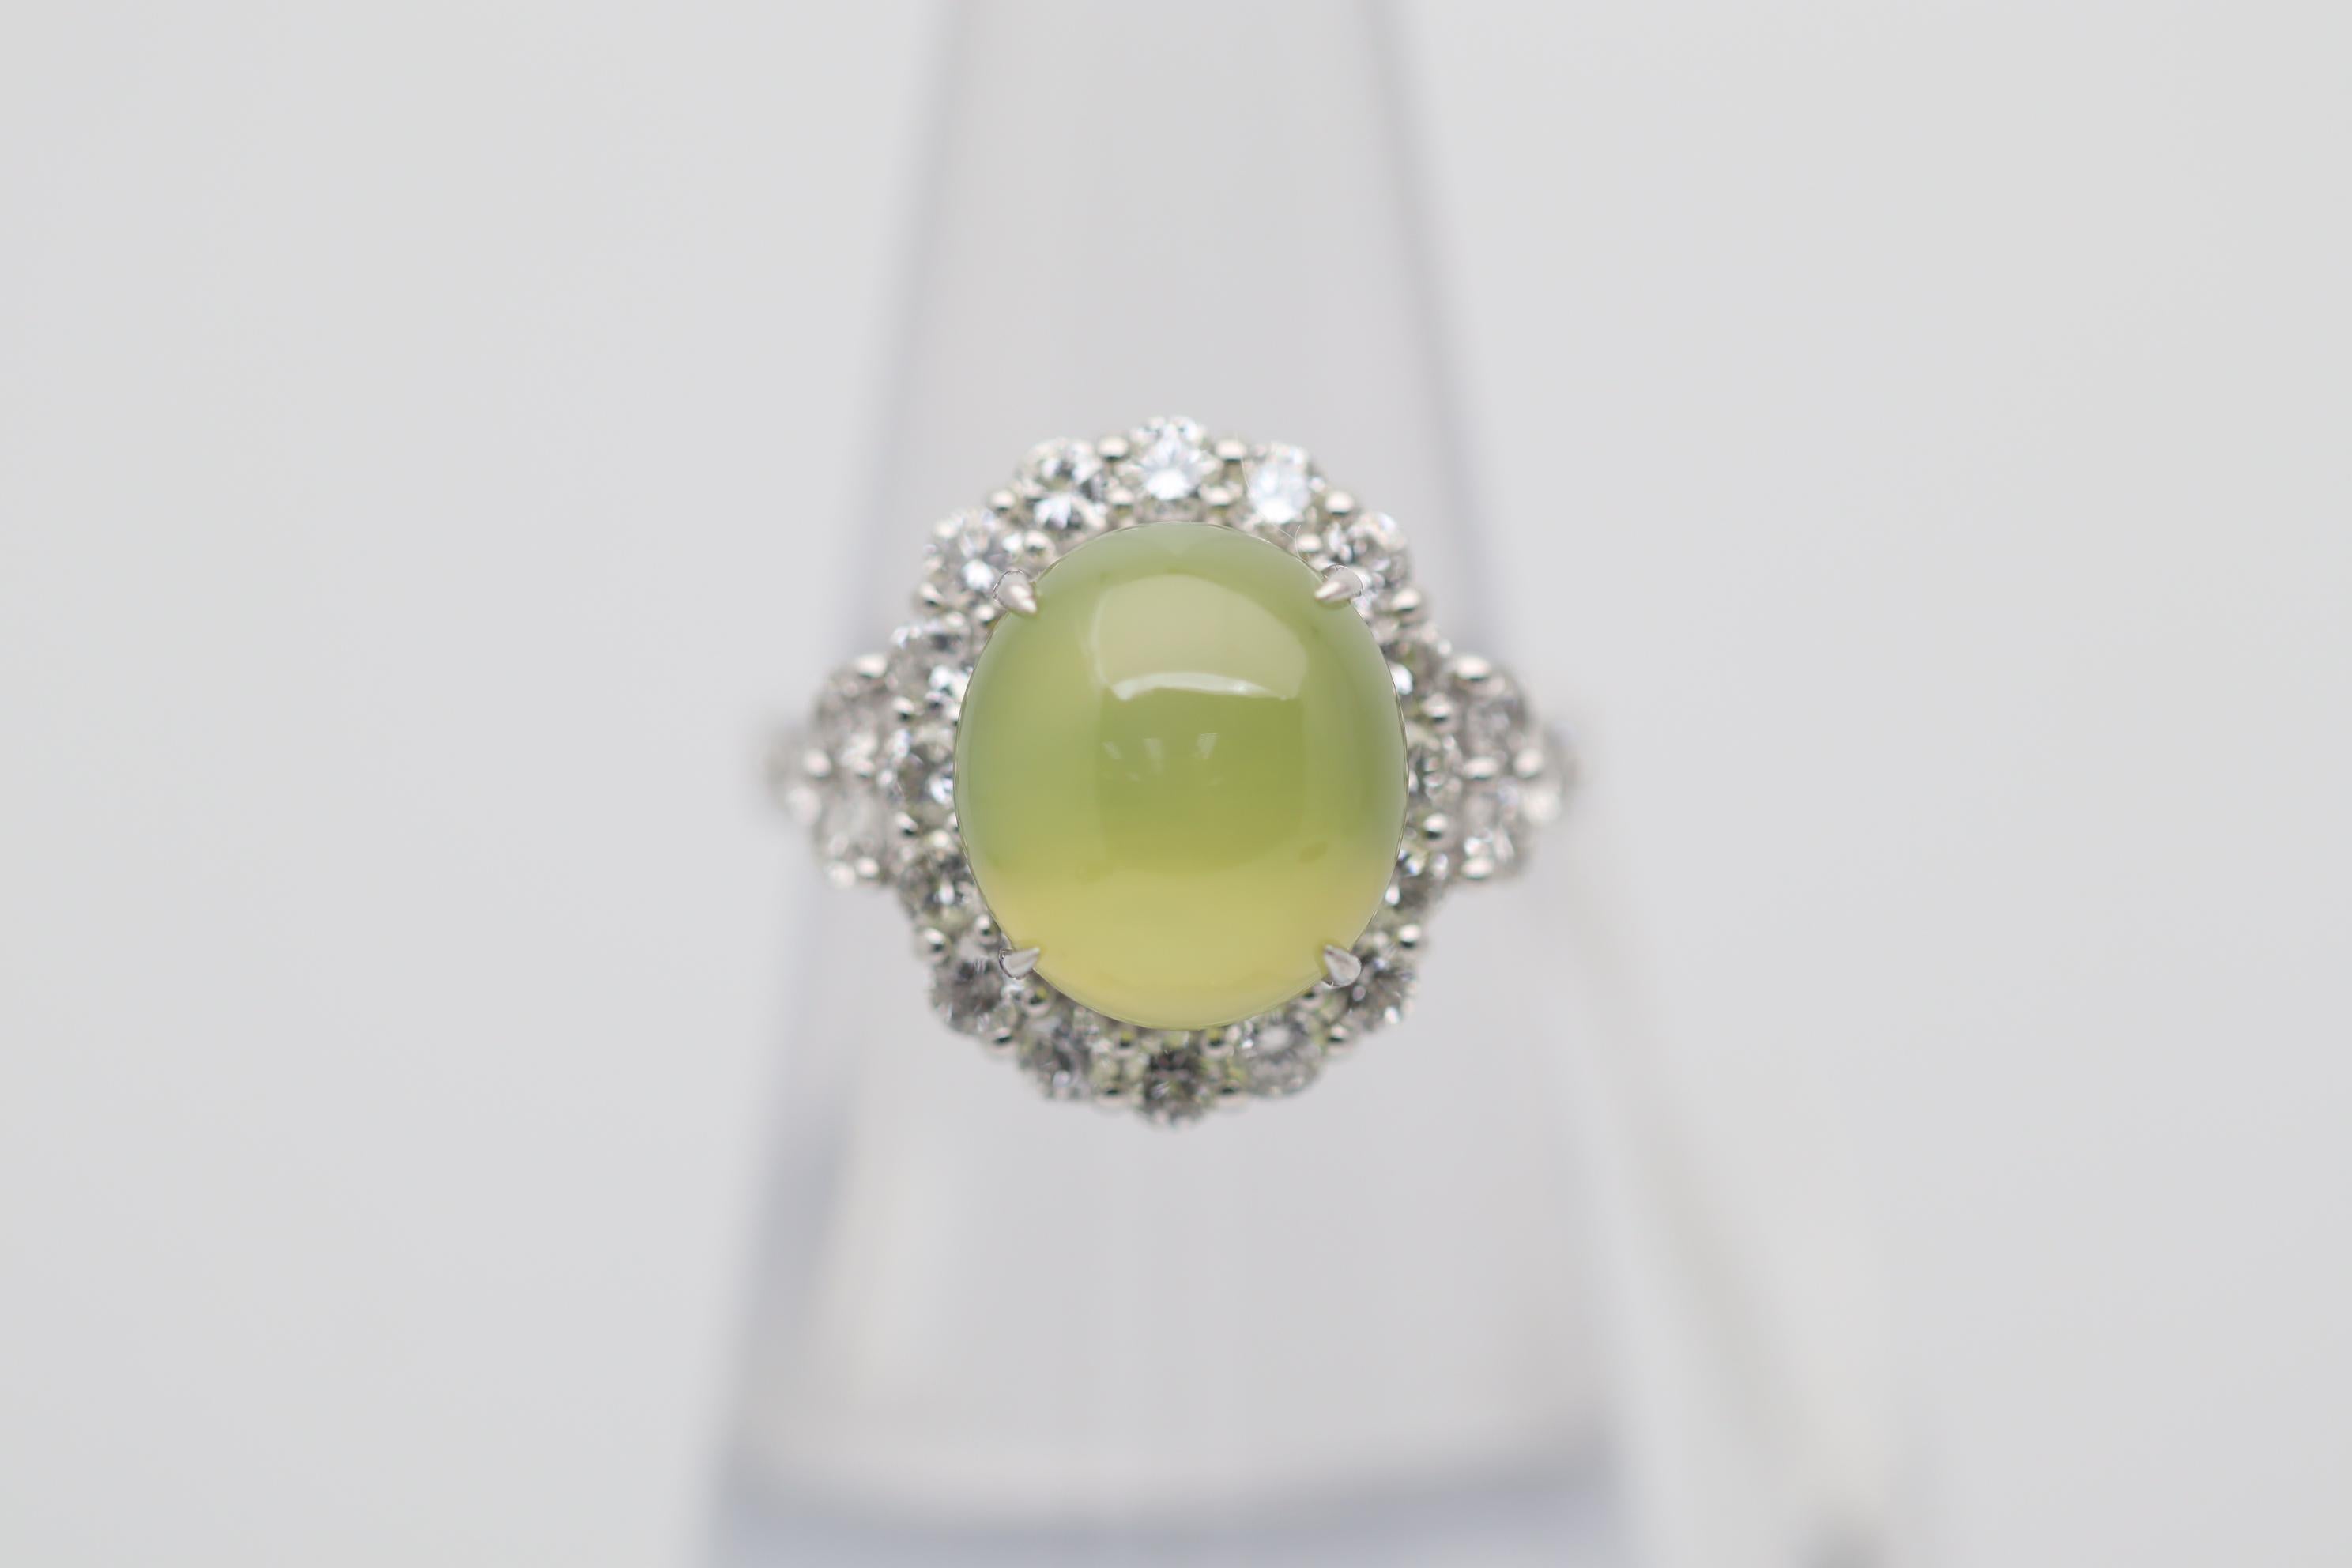 A superb gem cats eye chrysoberyl takes center stage. It weighs an impressive 8.92 carats but what makes this example special is its clean transparent crystal. The stone is as clean as it gets, even if you look at it with a microscope. This gives